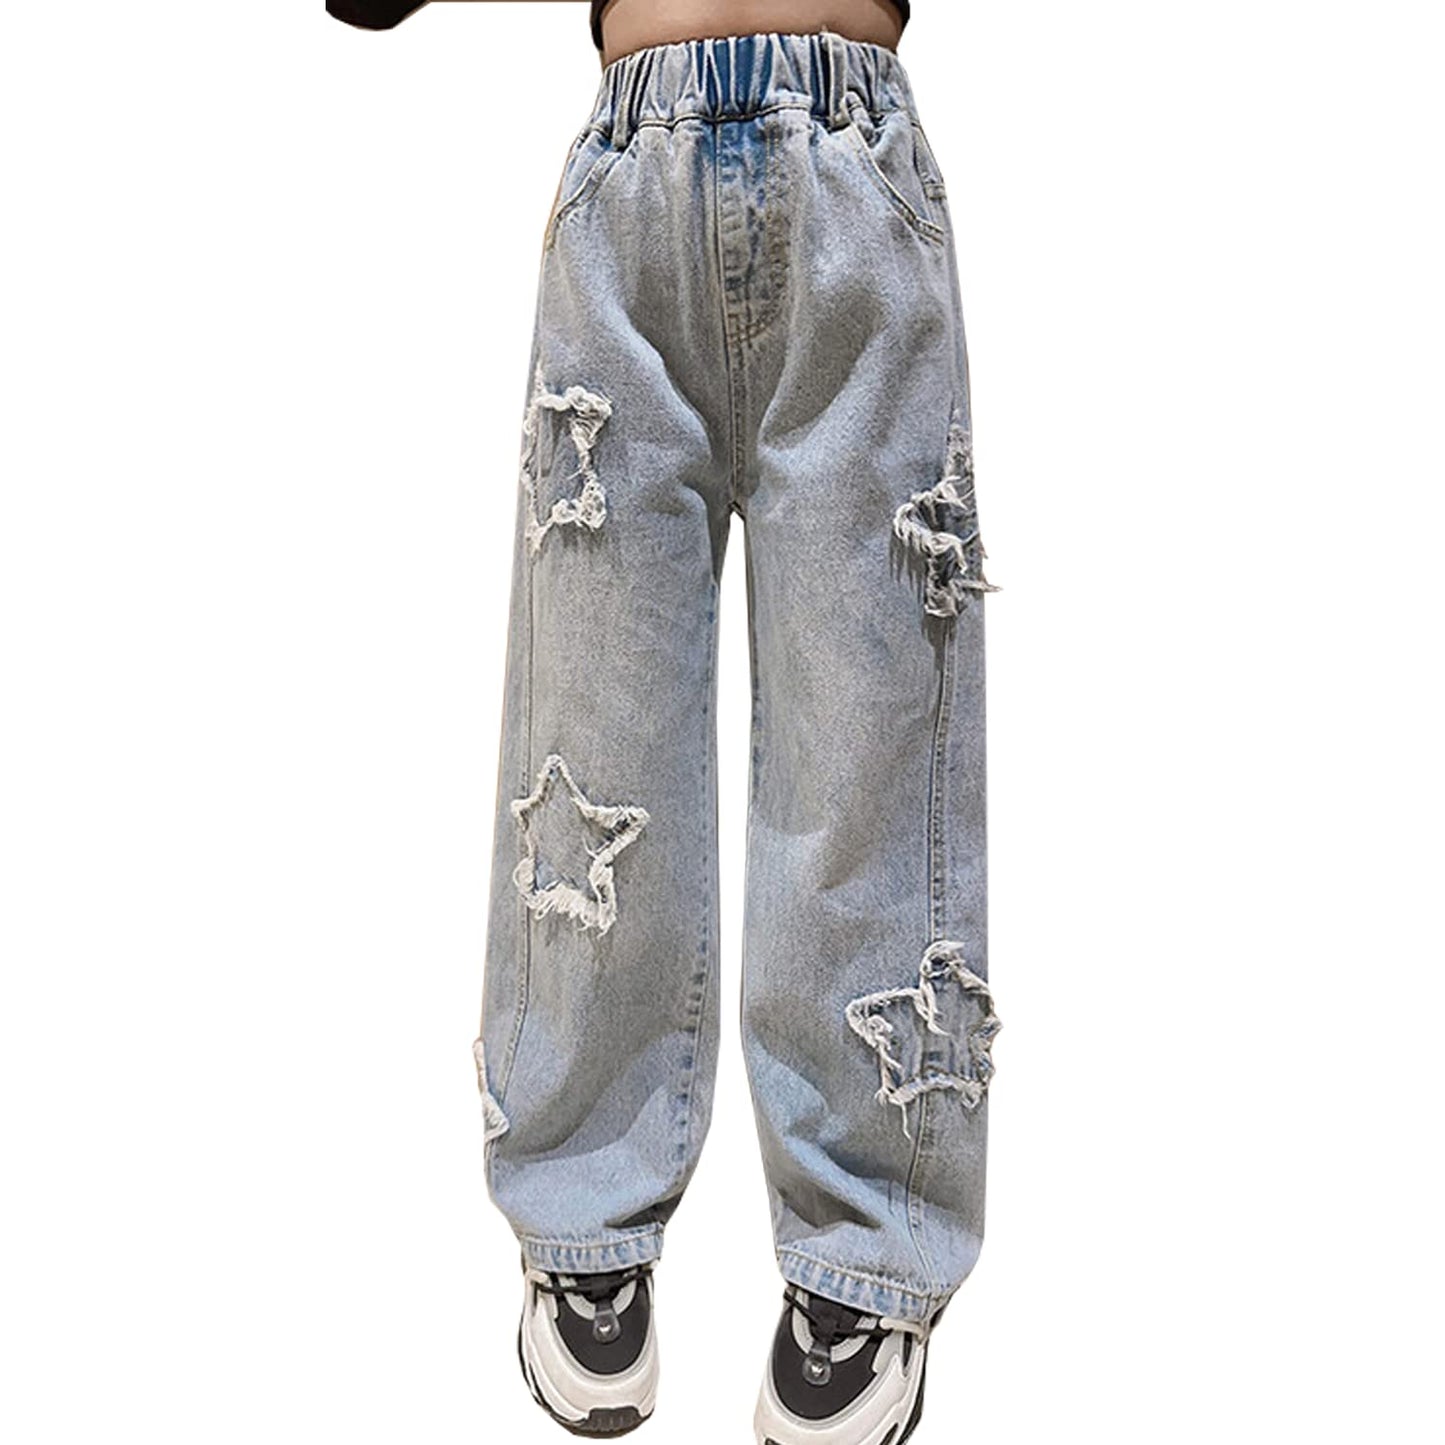 YaYabroe Girls Baggy Jeans Casual Wide Leg Denim Pants Jeans Kids Clothes Size 6-7 Years